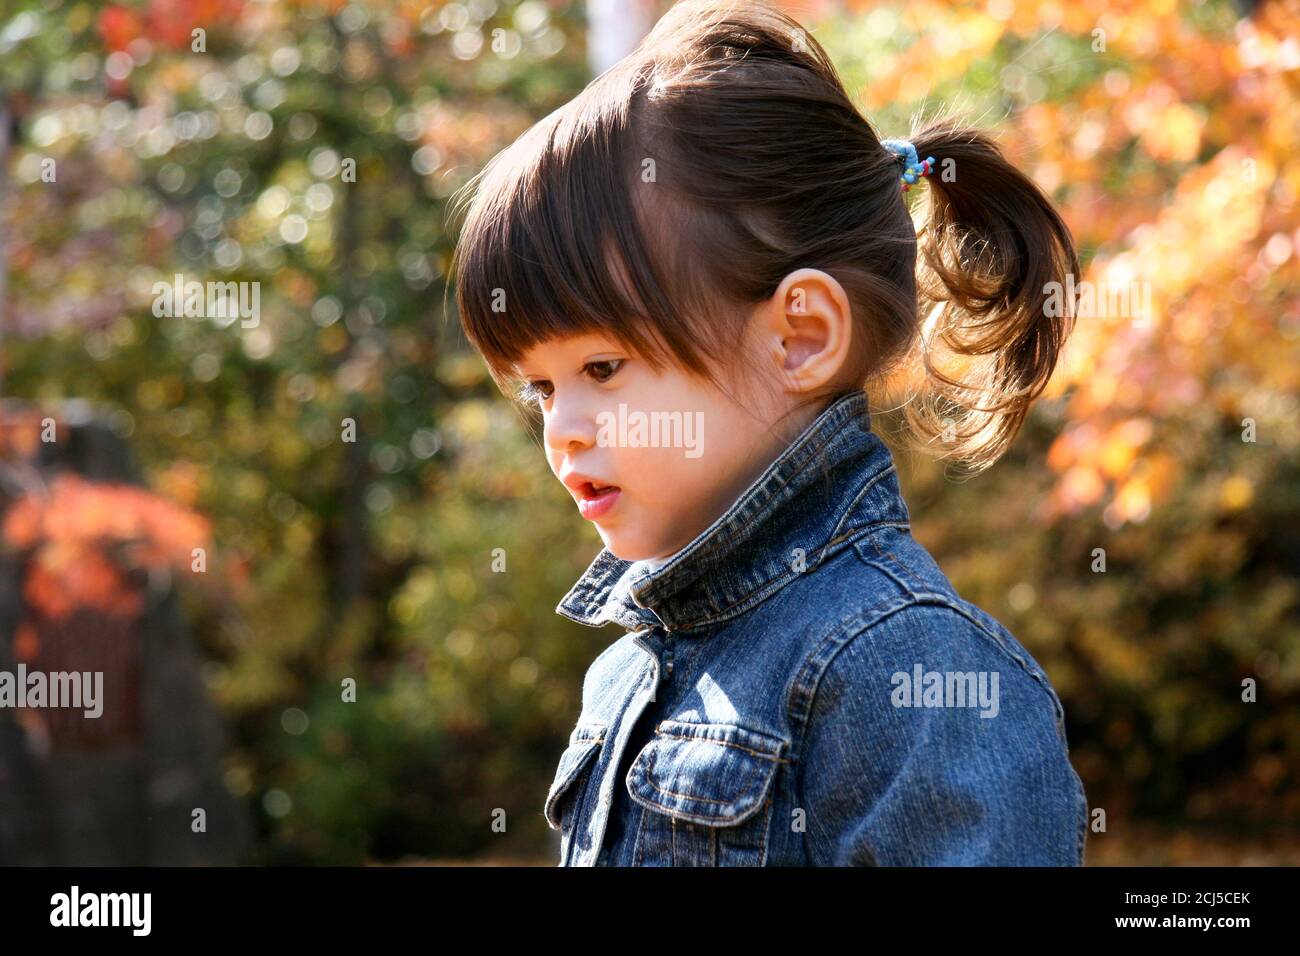 Close up of a little girl in a jeans jacket with autumn foliage in the background. Stock Photo